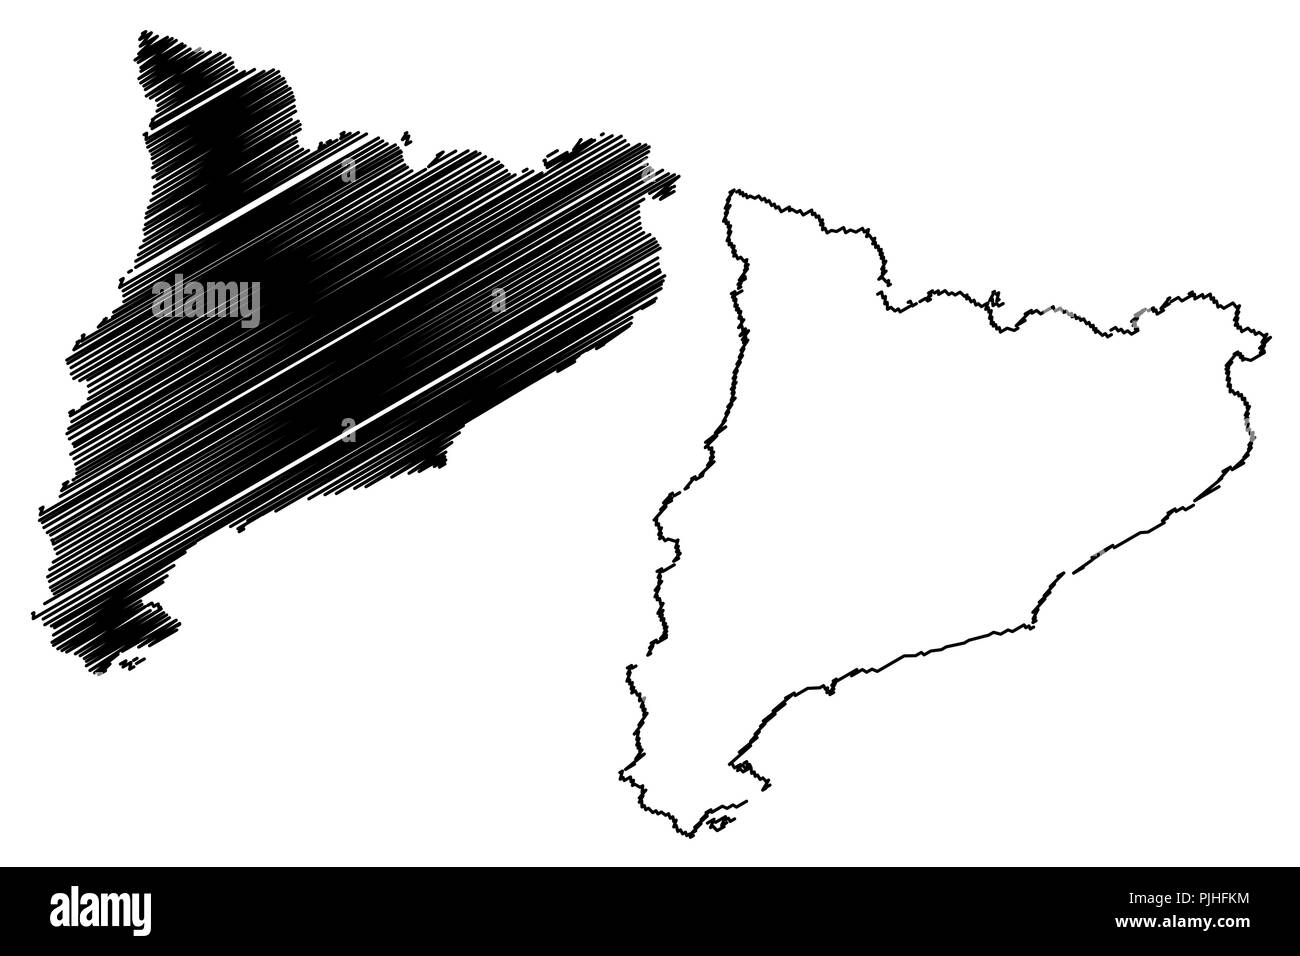 Map of catalonia Black and White Stock Photos & Images - Alamy